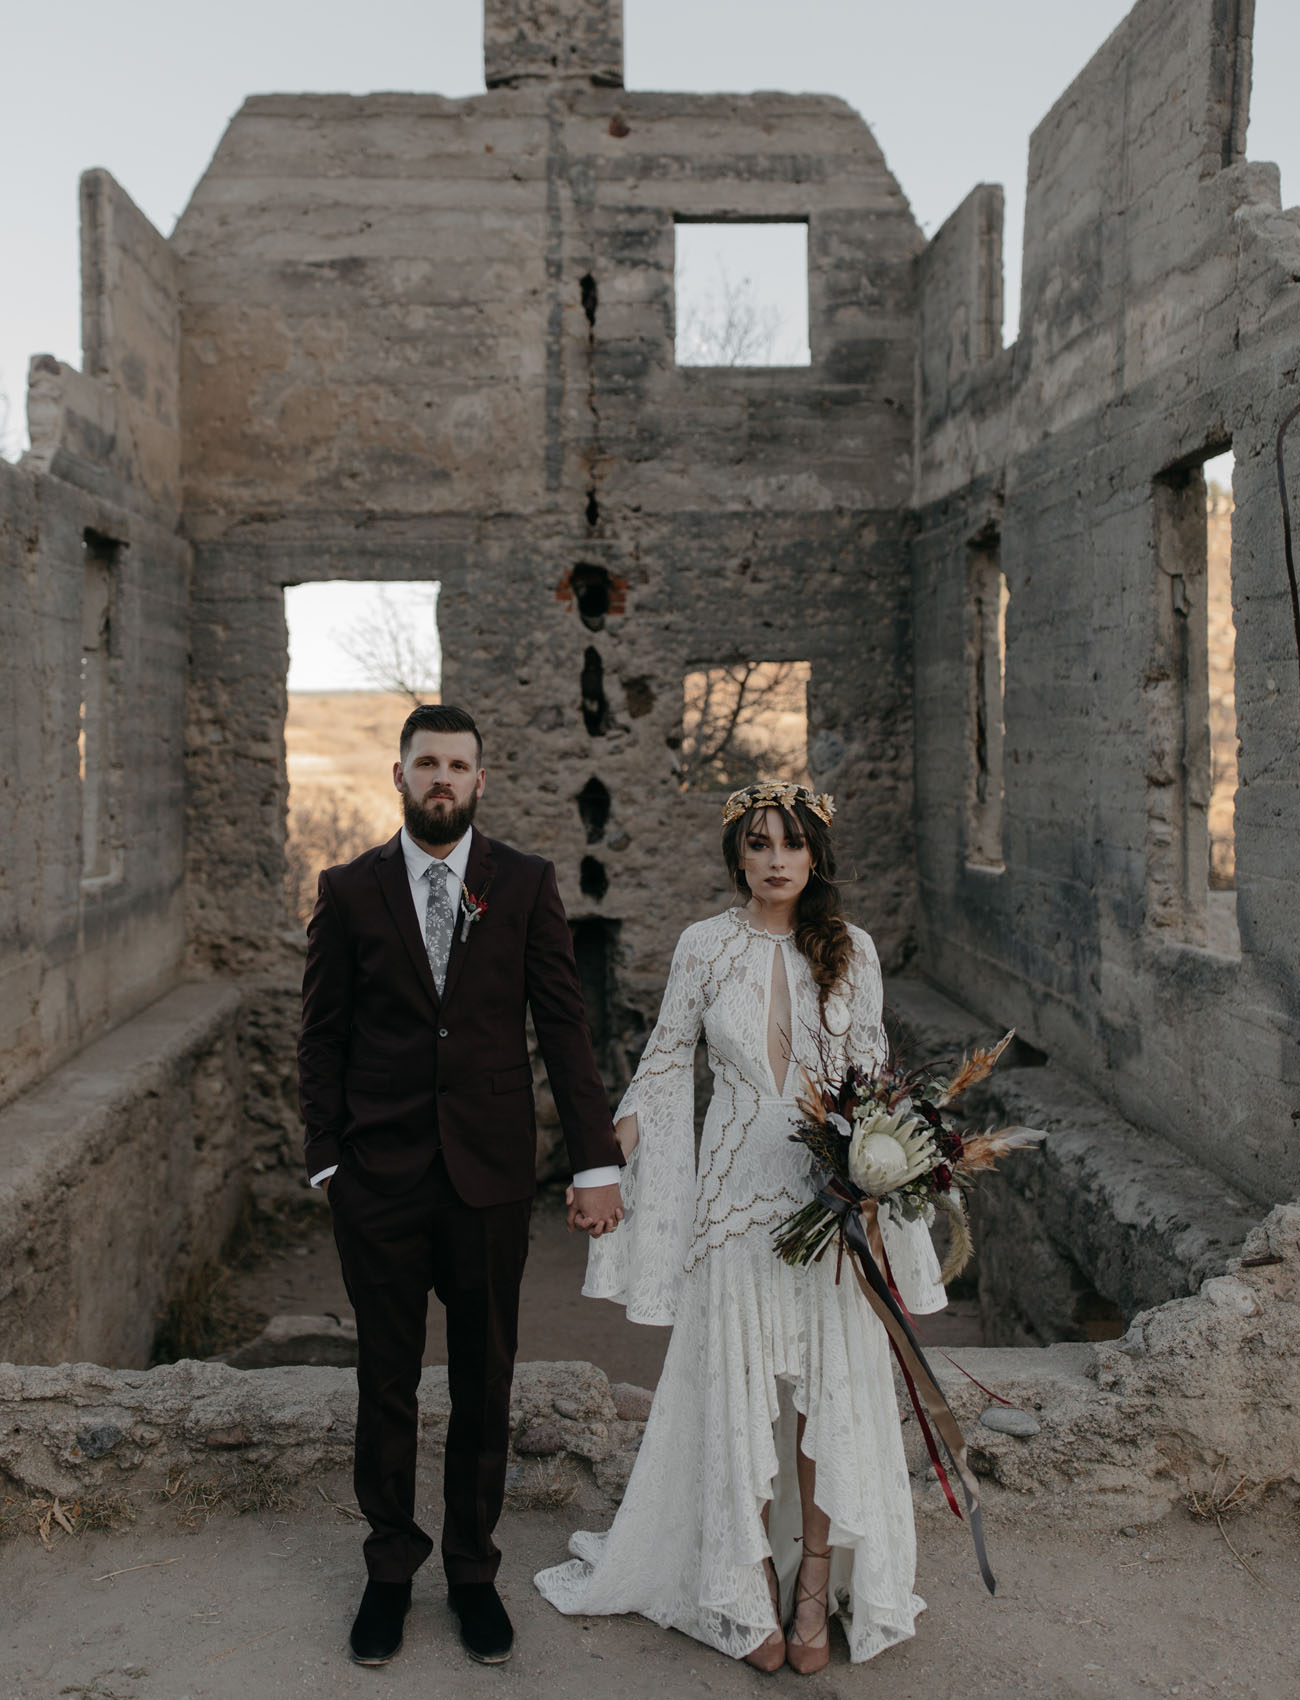  An Intimate Elopement Among the Ruins